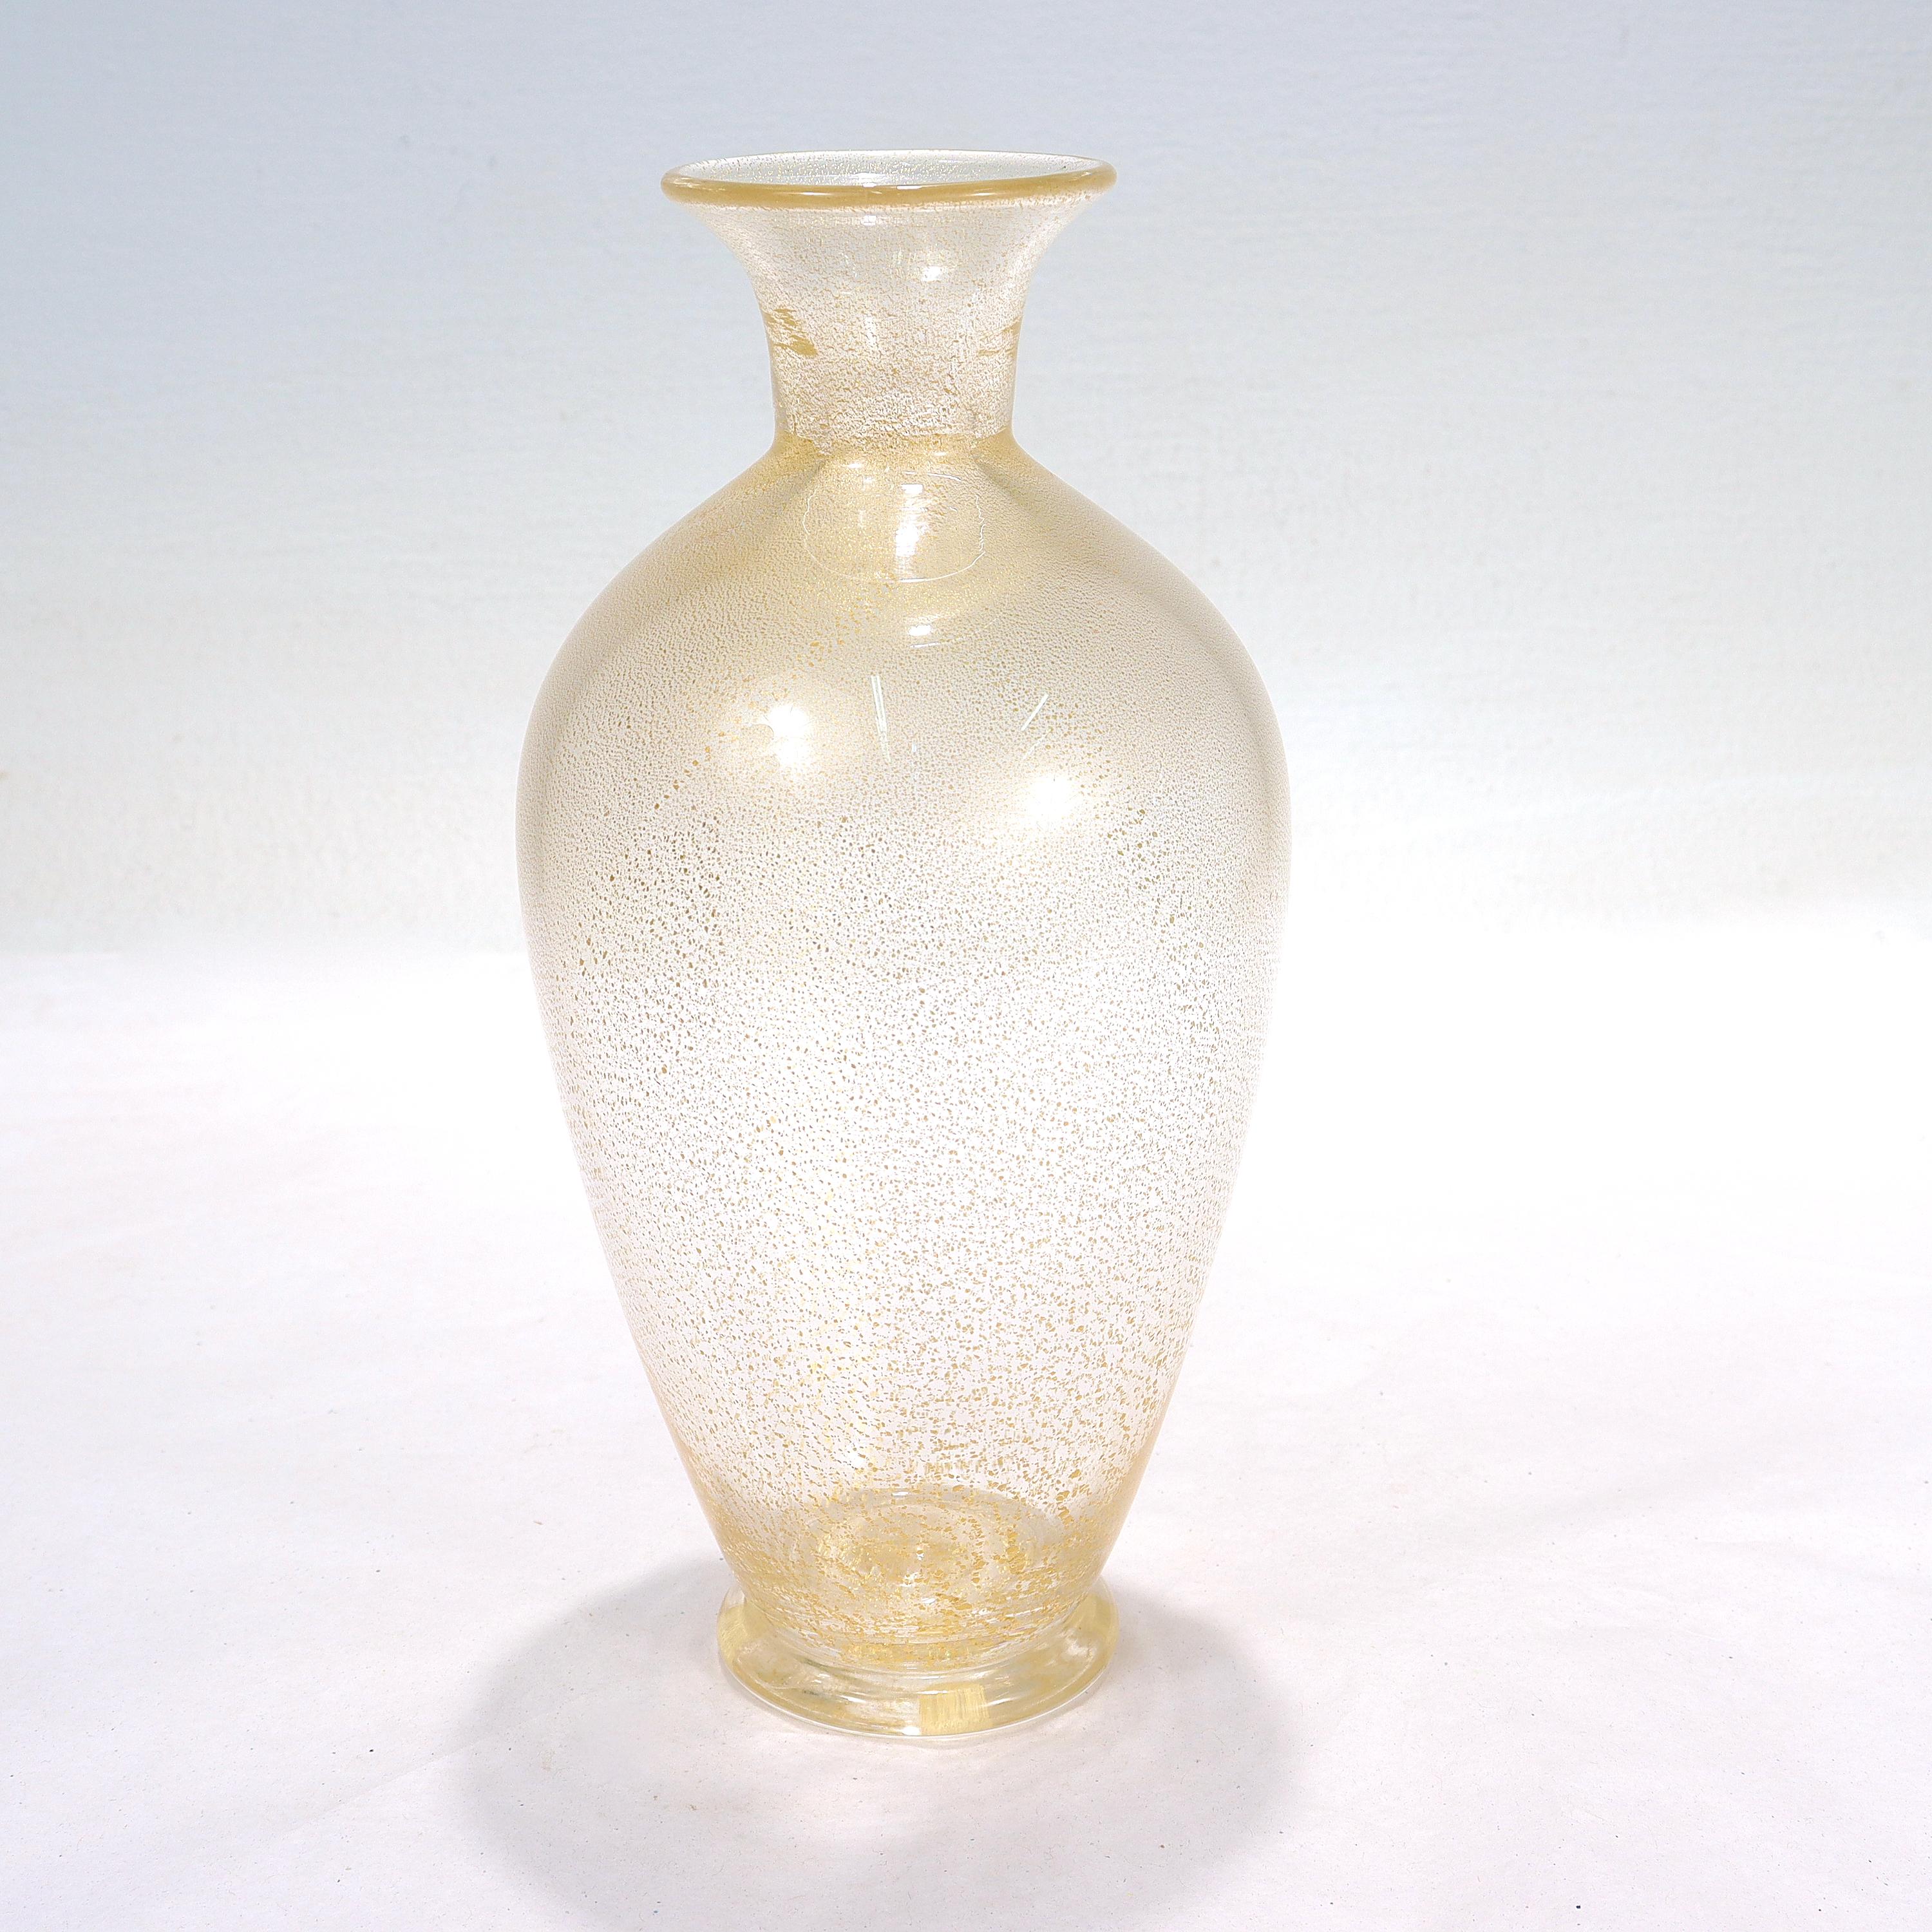 A fine Italian art glass vase.

By Archimede Seguso.

With gold fleck or foil inclusions throughout.

Signed with an etched signature to the base: Archimede Seguso Murano

Simply a wonderful vase from one of Italy's art glass